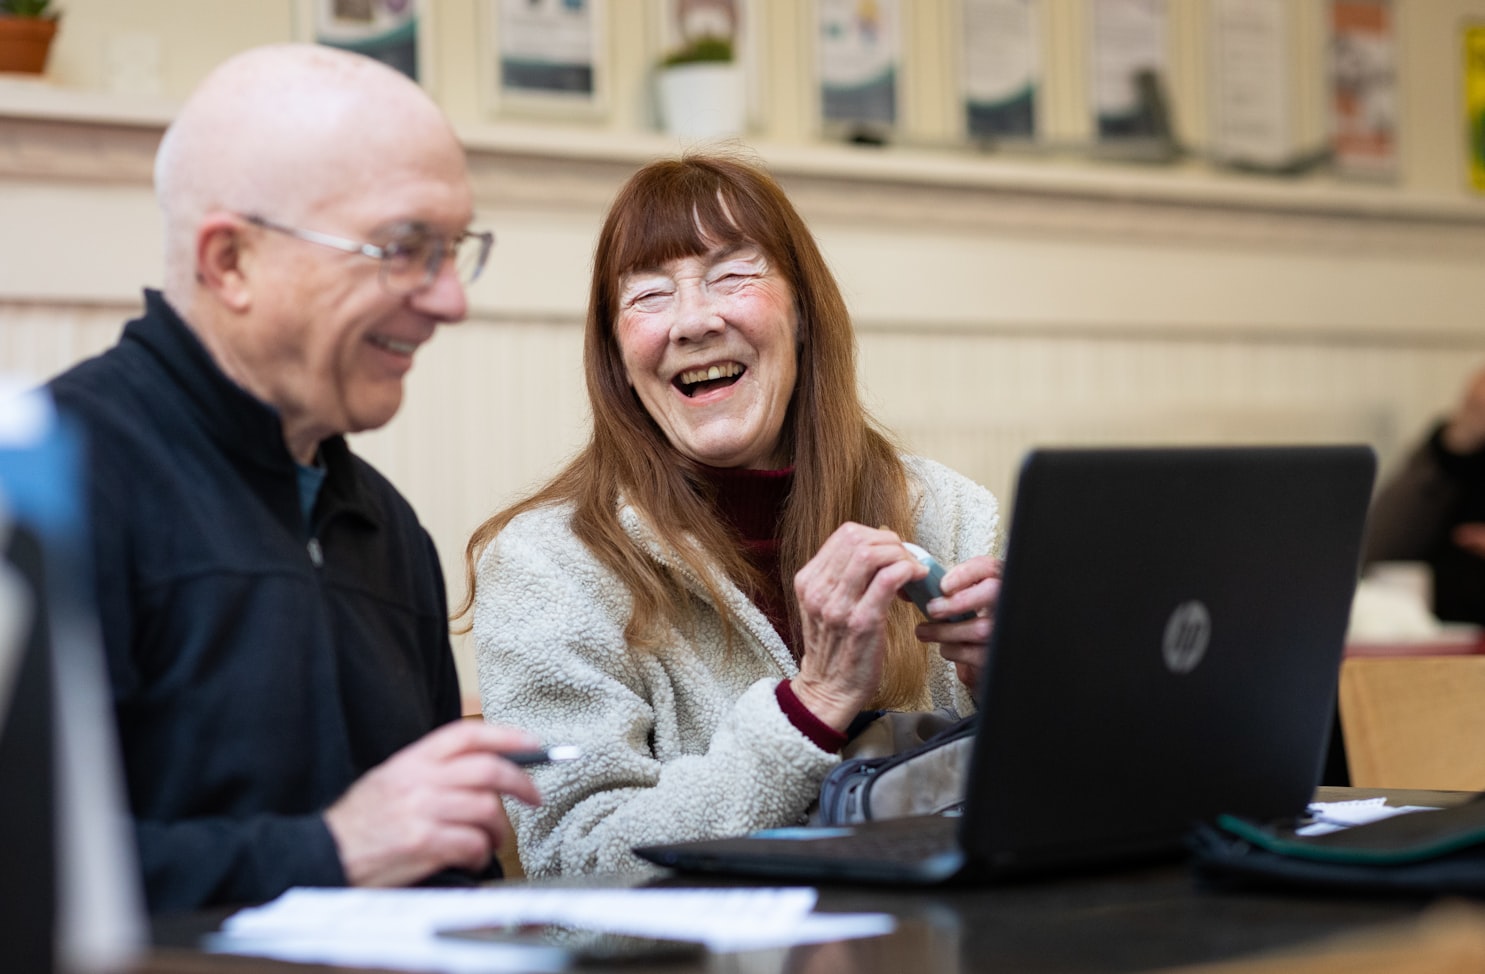 An older man and woman are laughing while using a laptop